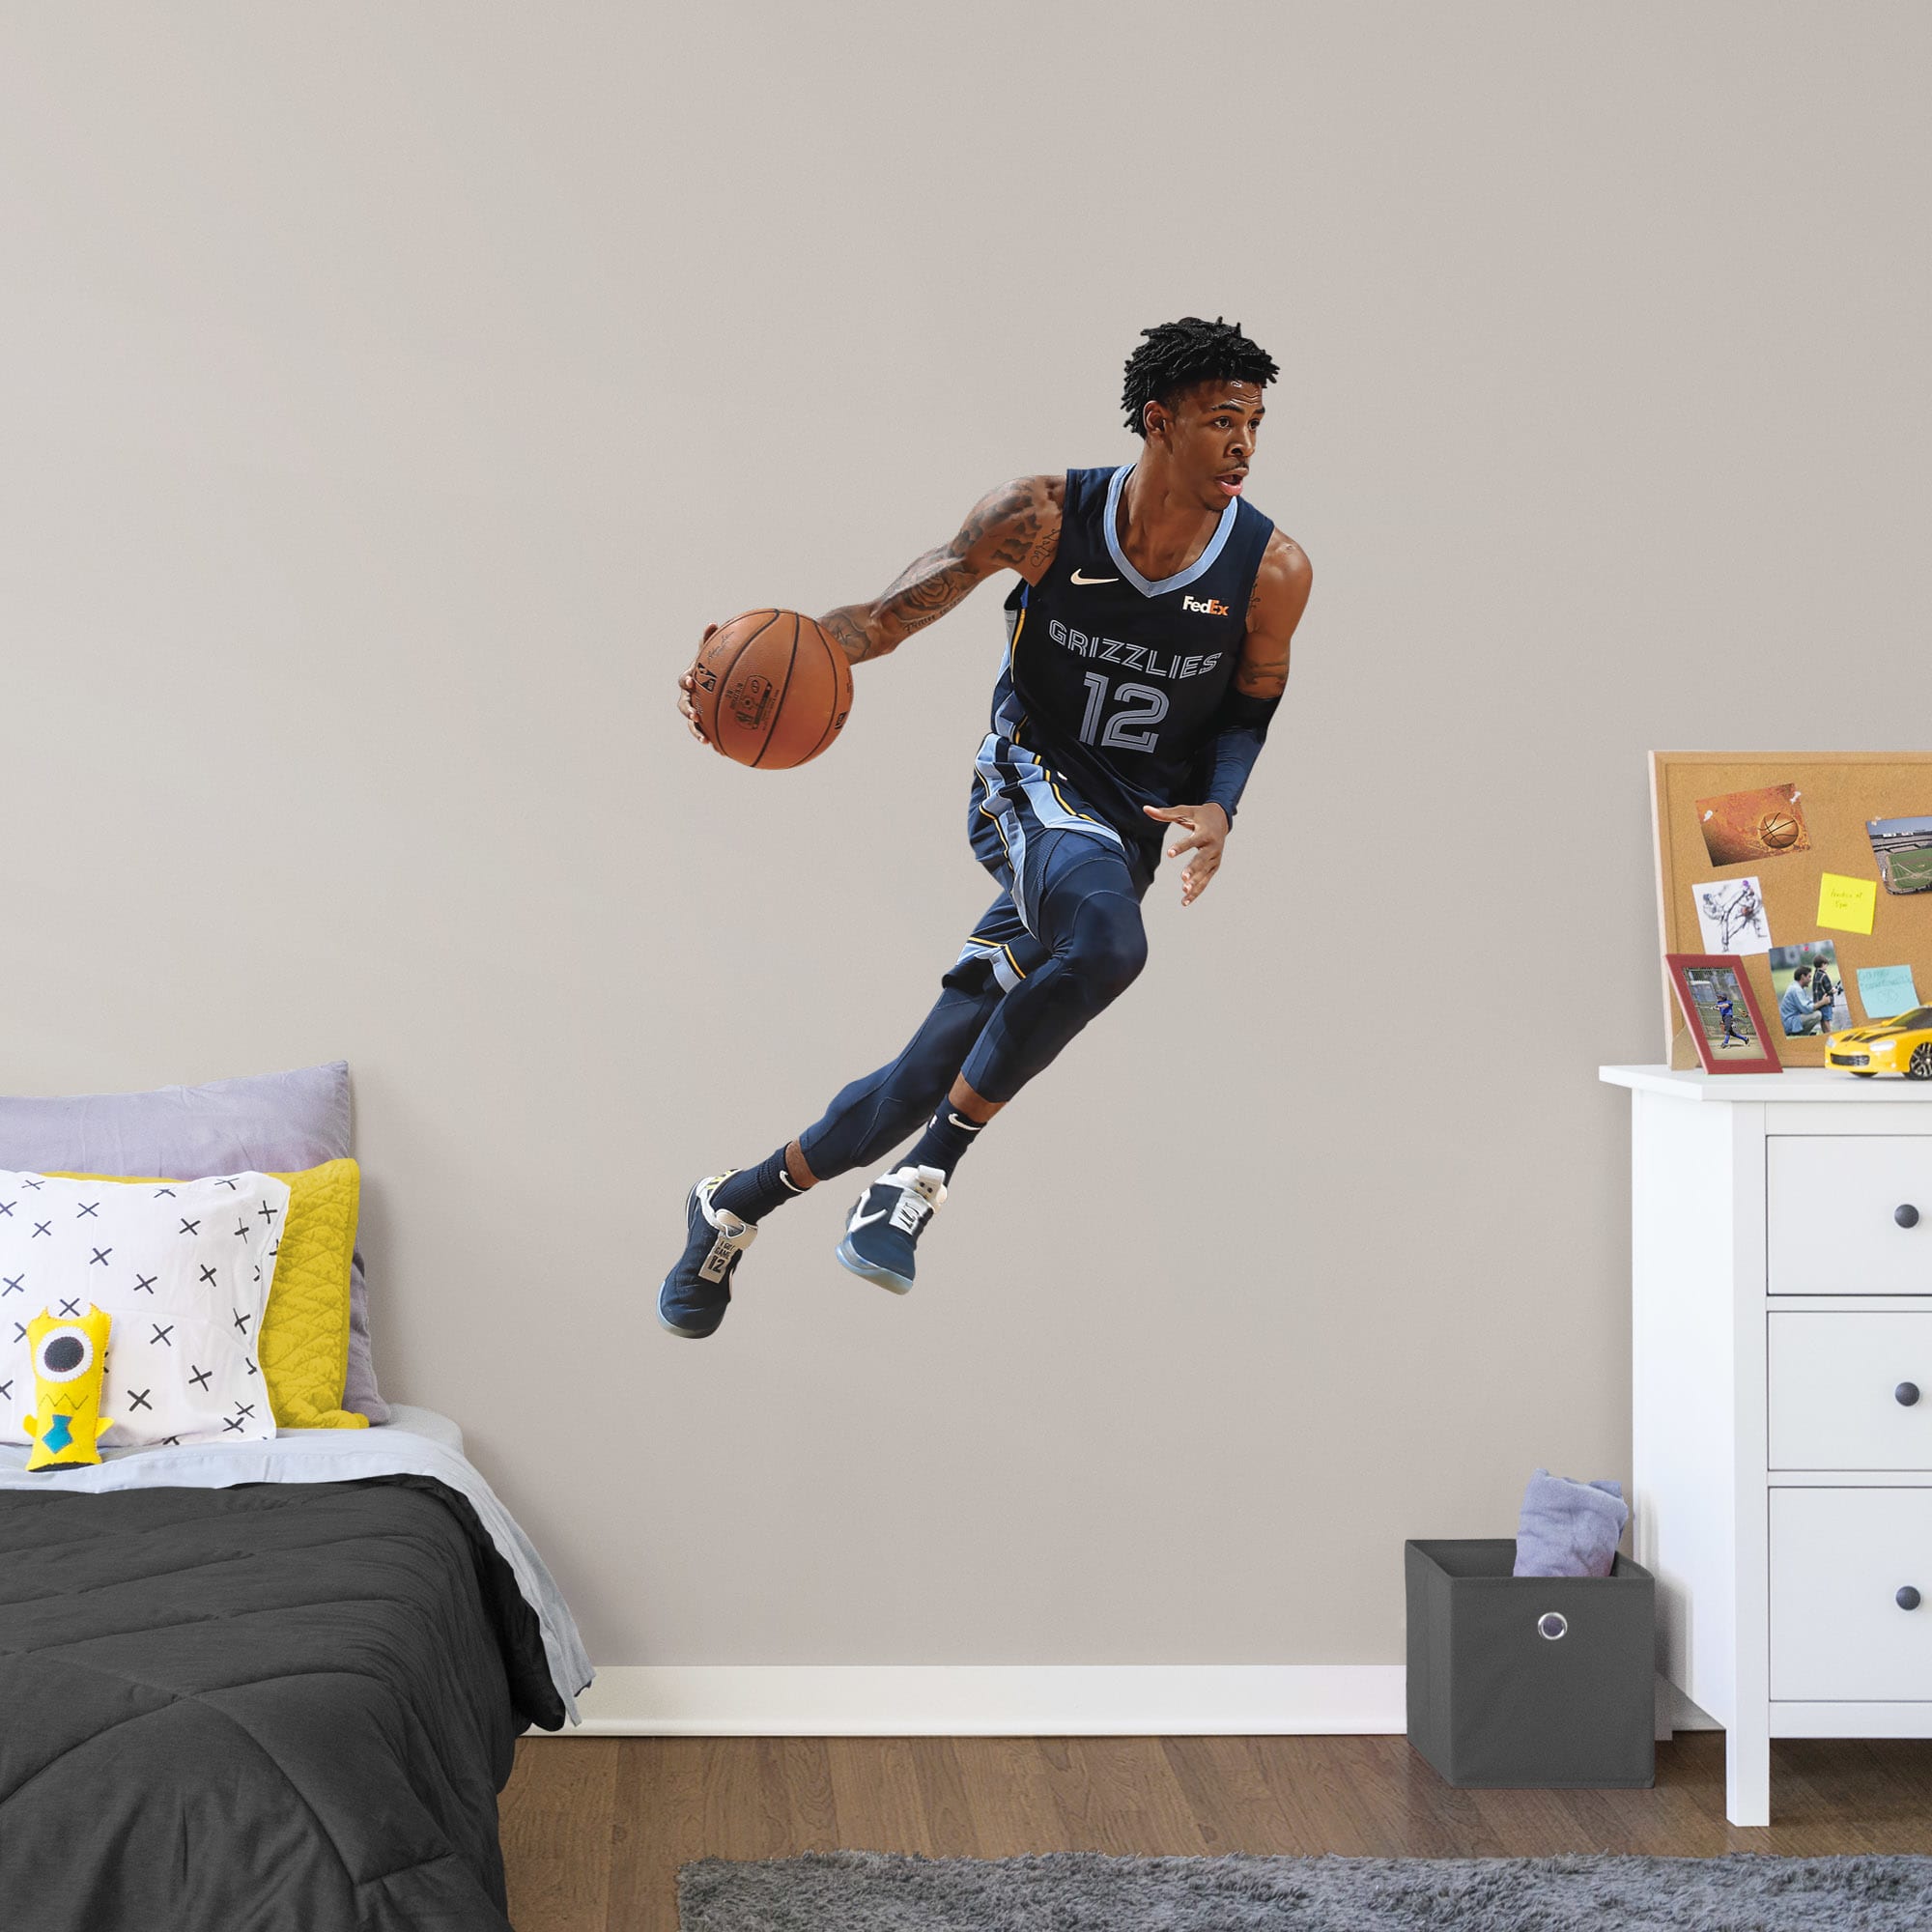 Ja Morant for Memphis Grizzlies - Officially Licensed NBA Removable Wall Decal Giant Athlete + 2 Decals (33"W x 51"H) by Fathead